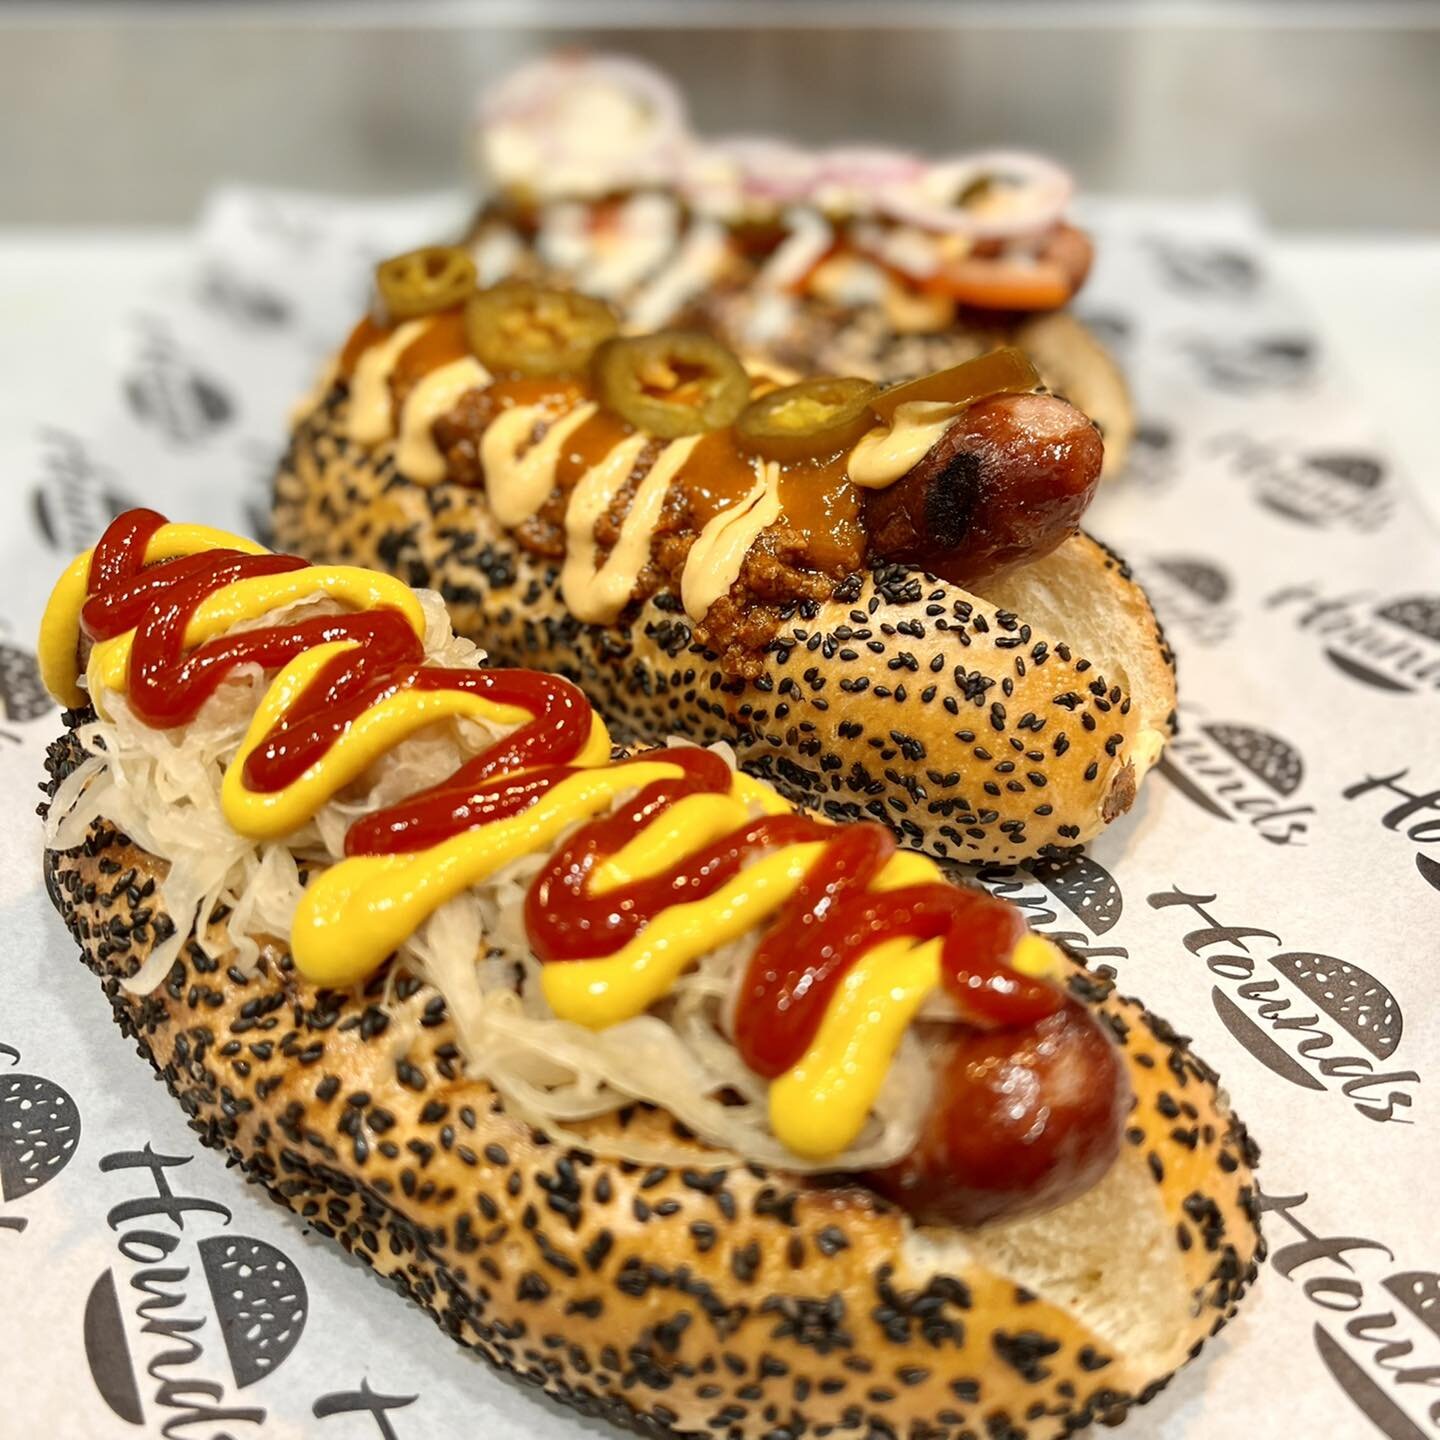 Bavarian Barbarian. 🌭🇩🇪🌭🇩🇪🌭
Hard to say easy to eat, authentic German pork kransky sausage, authentic sauerkraut, mustard and ketchup. Yummmm.

We have 4 hotdogs to choose from. 😋